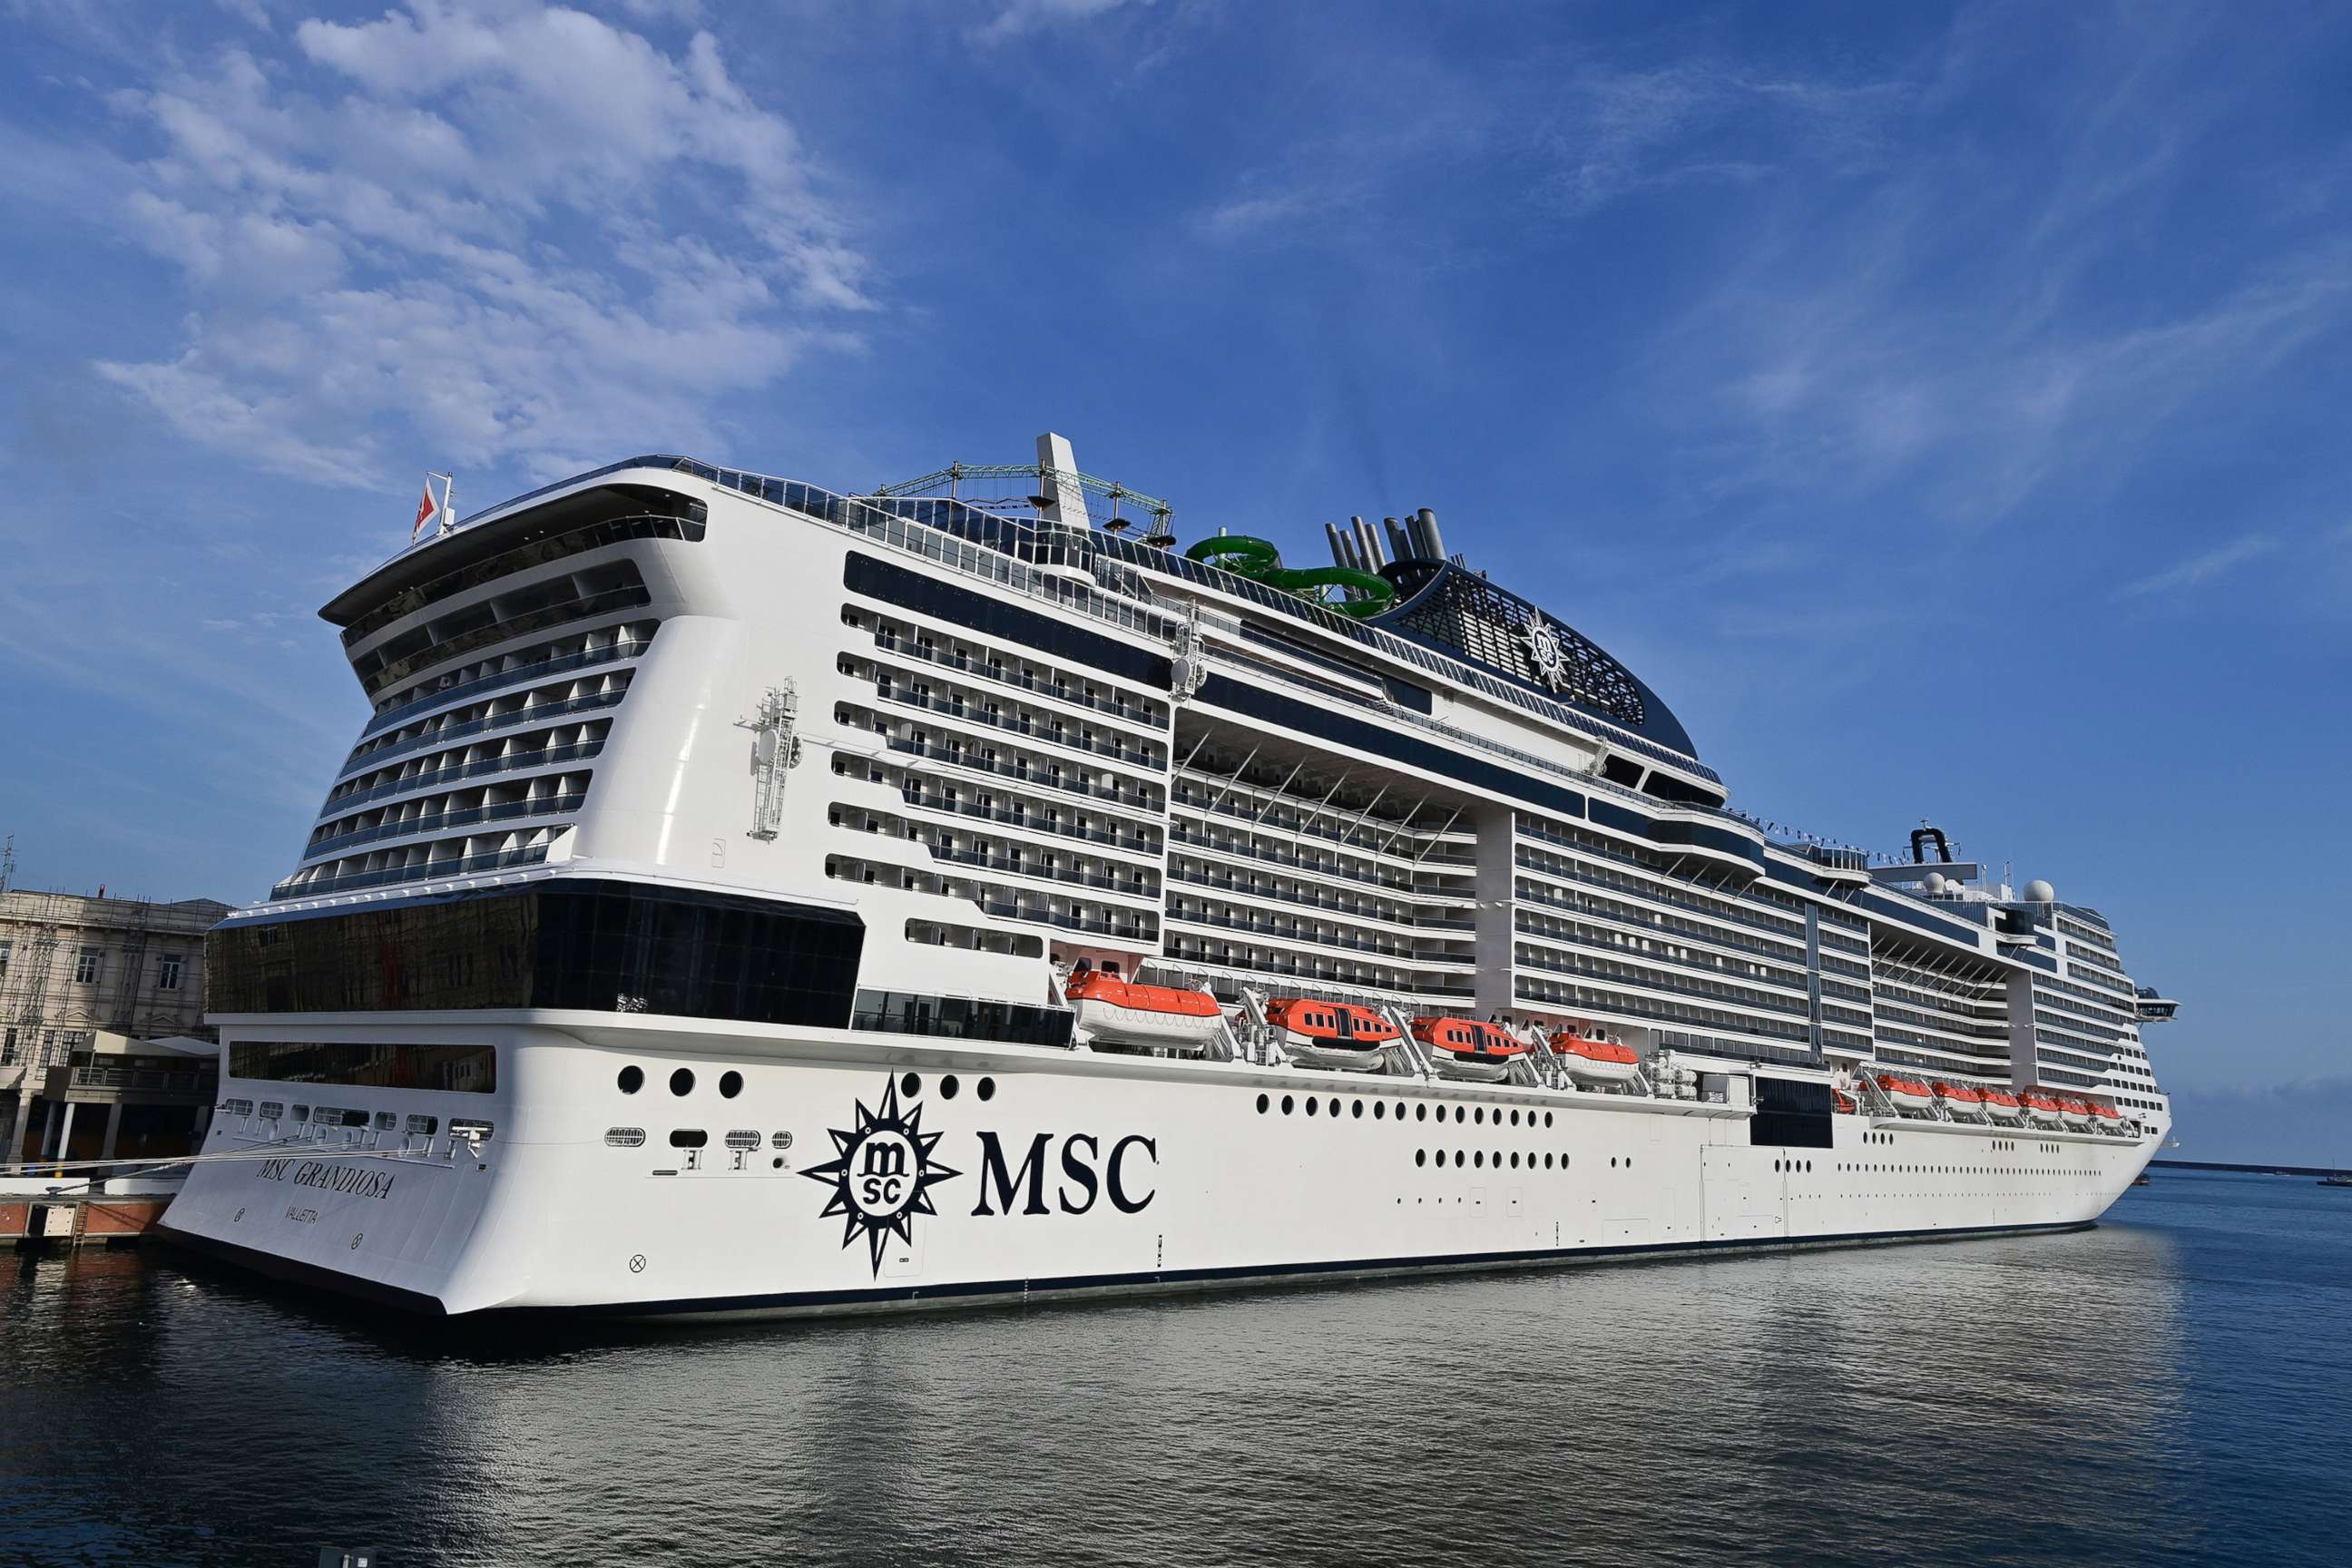 PHOTO: A picture taken in the northern Italian port of Genoa on Aug. 16, 2020, shows the MSC Grandiosa cruise liner leaving the port pulled by a little boat after six-and-half months of inactivity due to the COVID-19 pandemic.